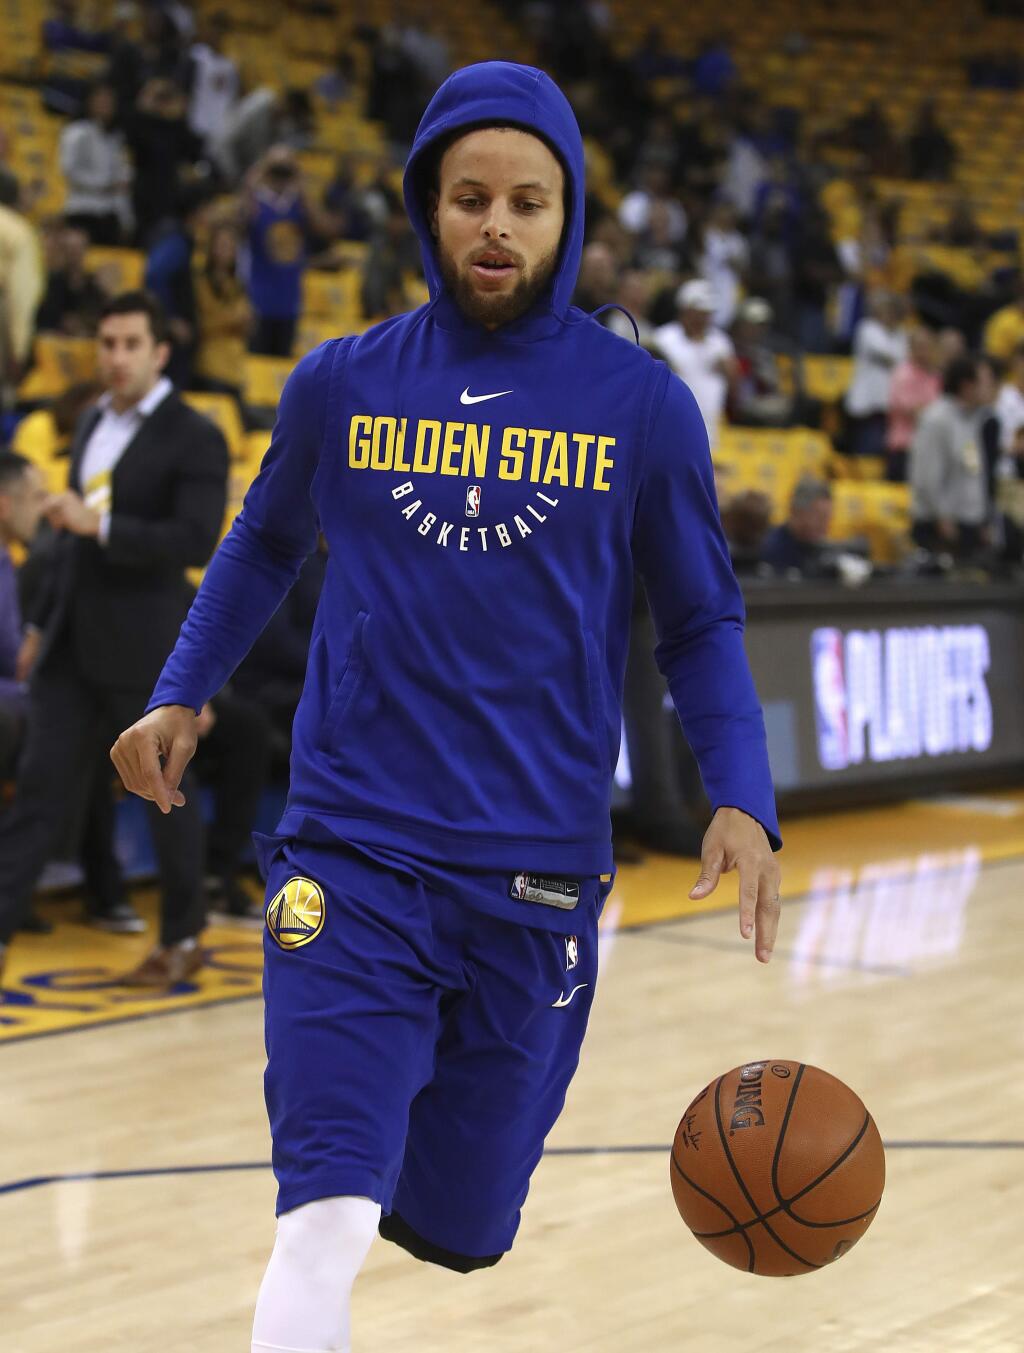 Golden State Warriors' Stephen Curry warms up prior to Game 1 of a first-round NBA basketball playoff series against the San Antonio Spurs Saturday, April 14, 2018, in Oakland, Calif. (AP Photo/Ben Margot)